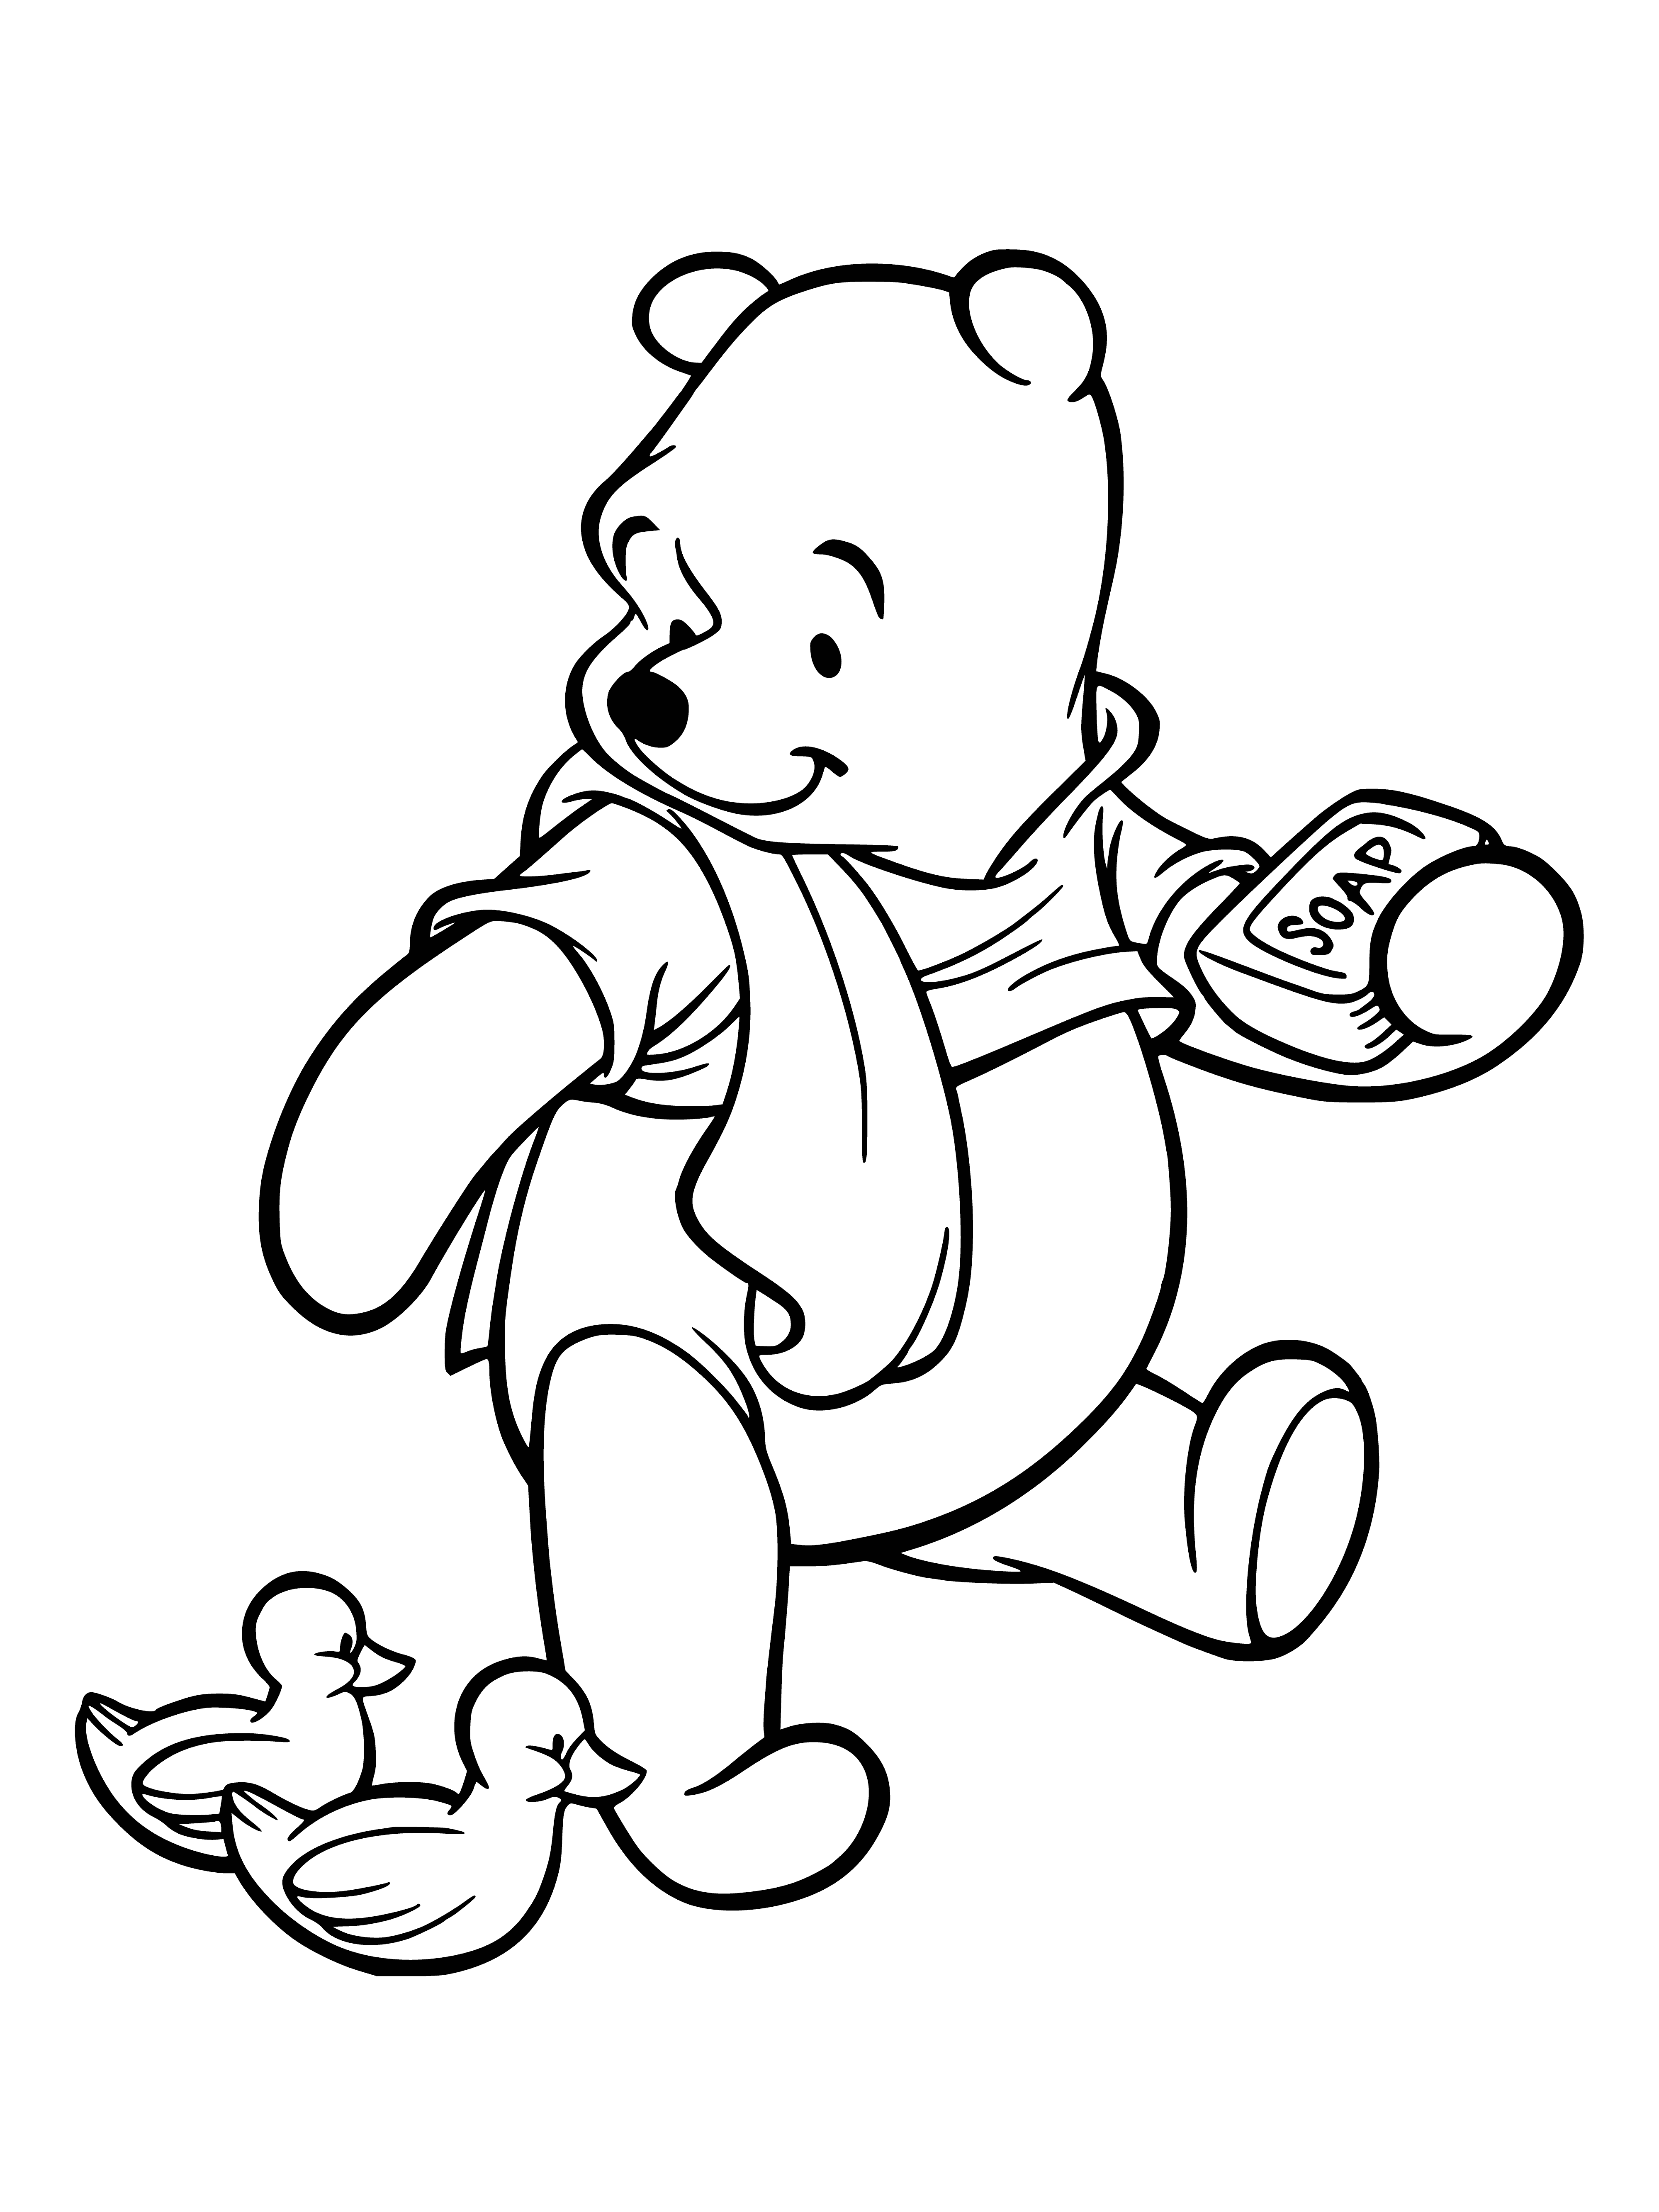 coloring page: Winnie the Bear sitting on a log with a pot of honey in front of him, hugging his knees and wearing a red shirt. #happybear